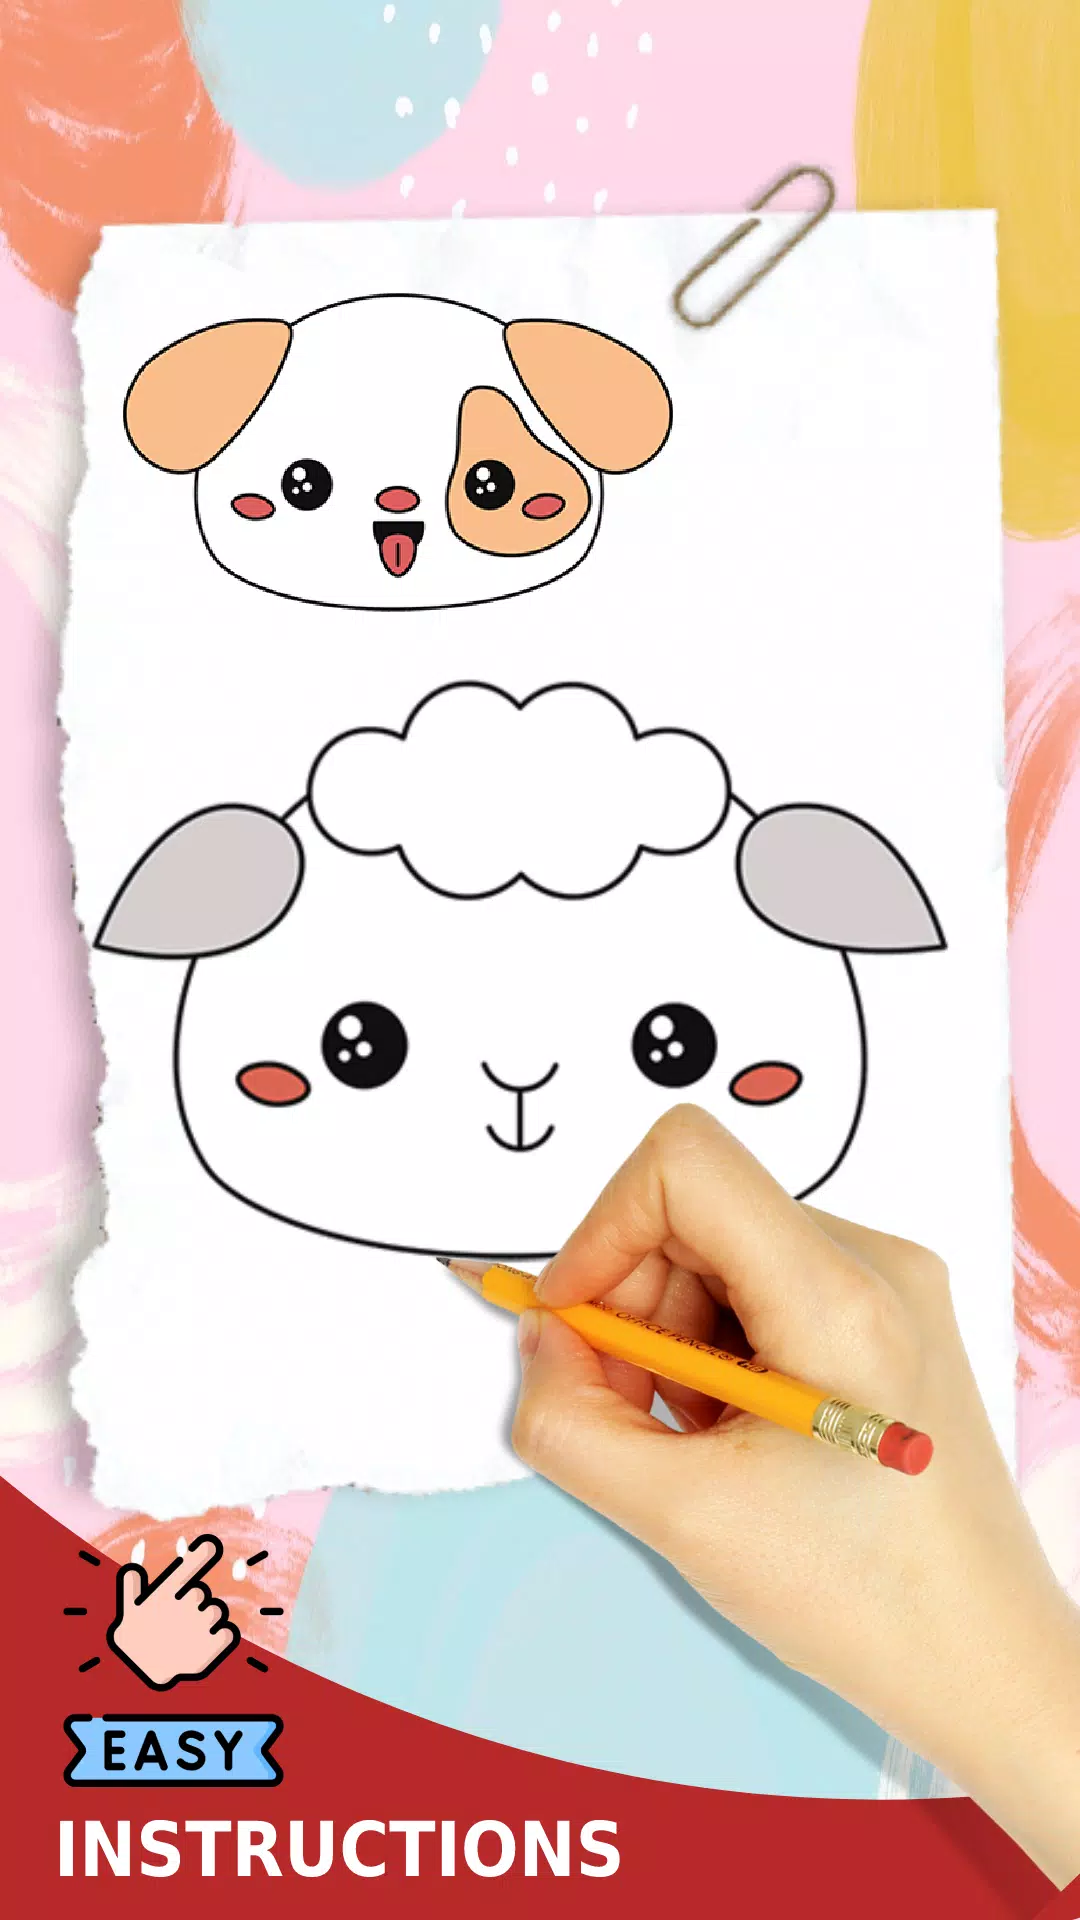 Tải xuống APK Draw Cute Animals Face Easy cho Android